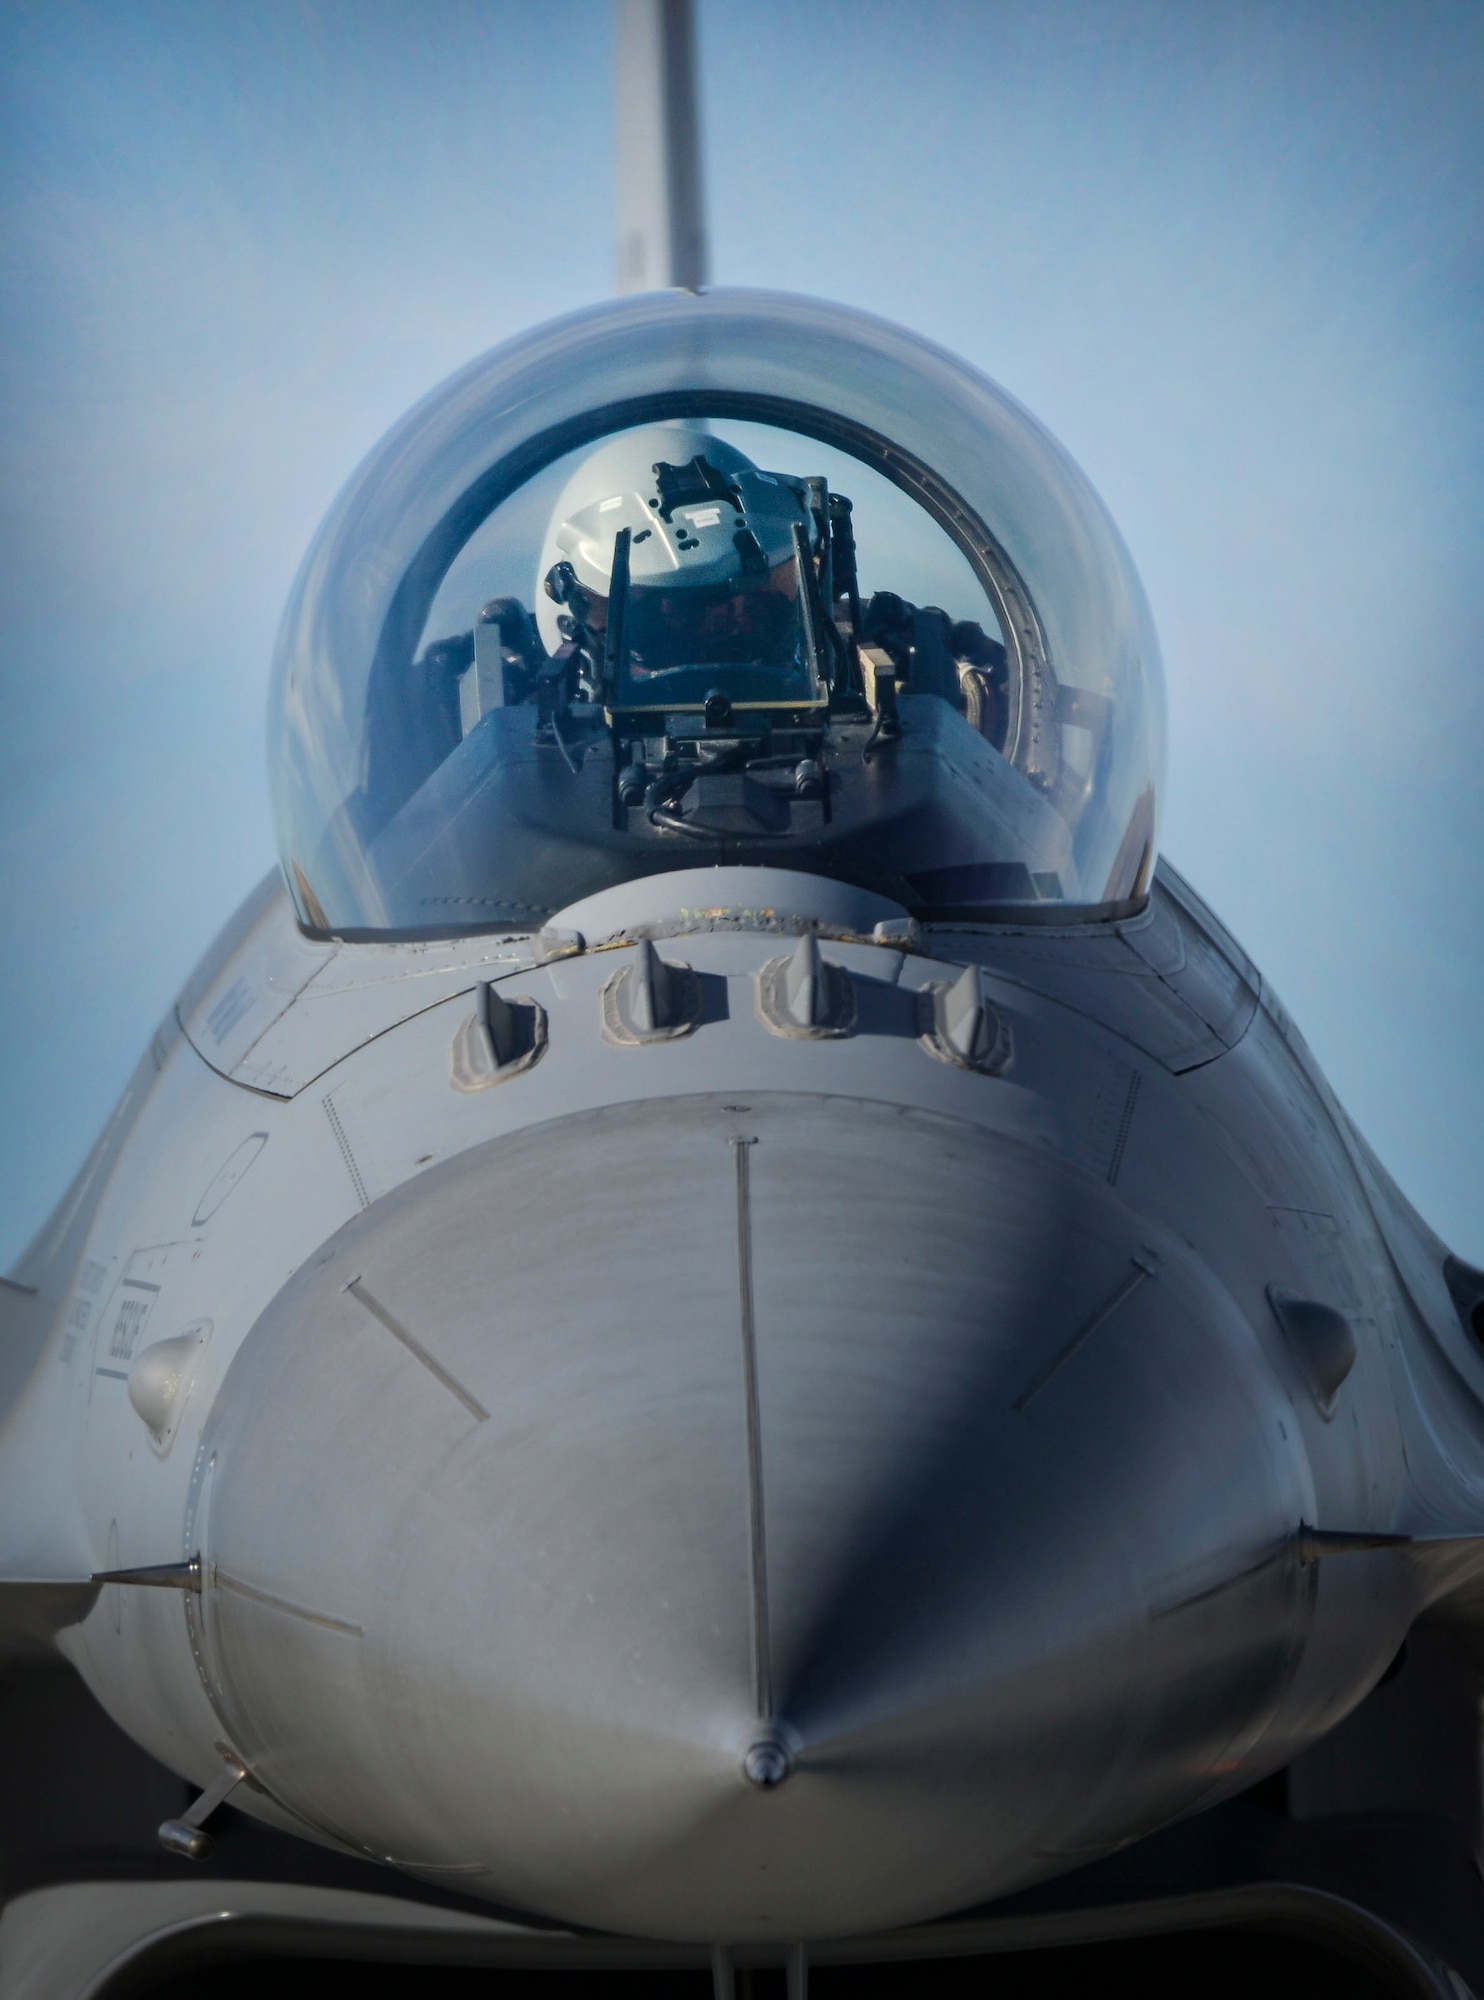 An F-16 Fighting Falcon pilot positions for take-off during Red Flag 16-1 at Nellis Air Force Base, Nev., Jan 25, 2016. This mock battle in the skies over the Nevada Test and Training Range has yielded results that will increase the combat capability of our armed forces for any future combat situation. (U.S. Air Force photo by Kevin Tanenbaum)